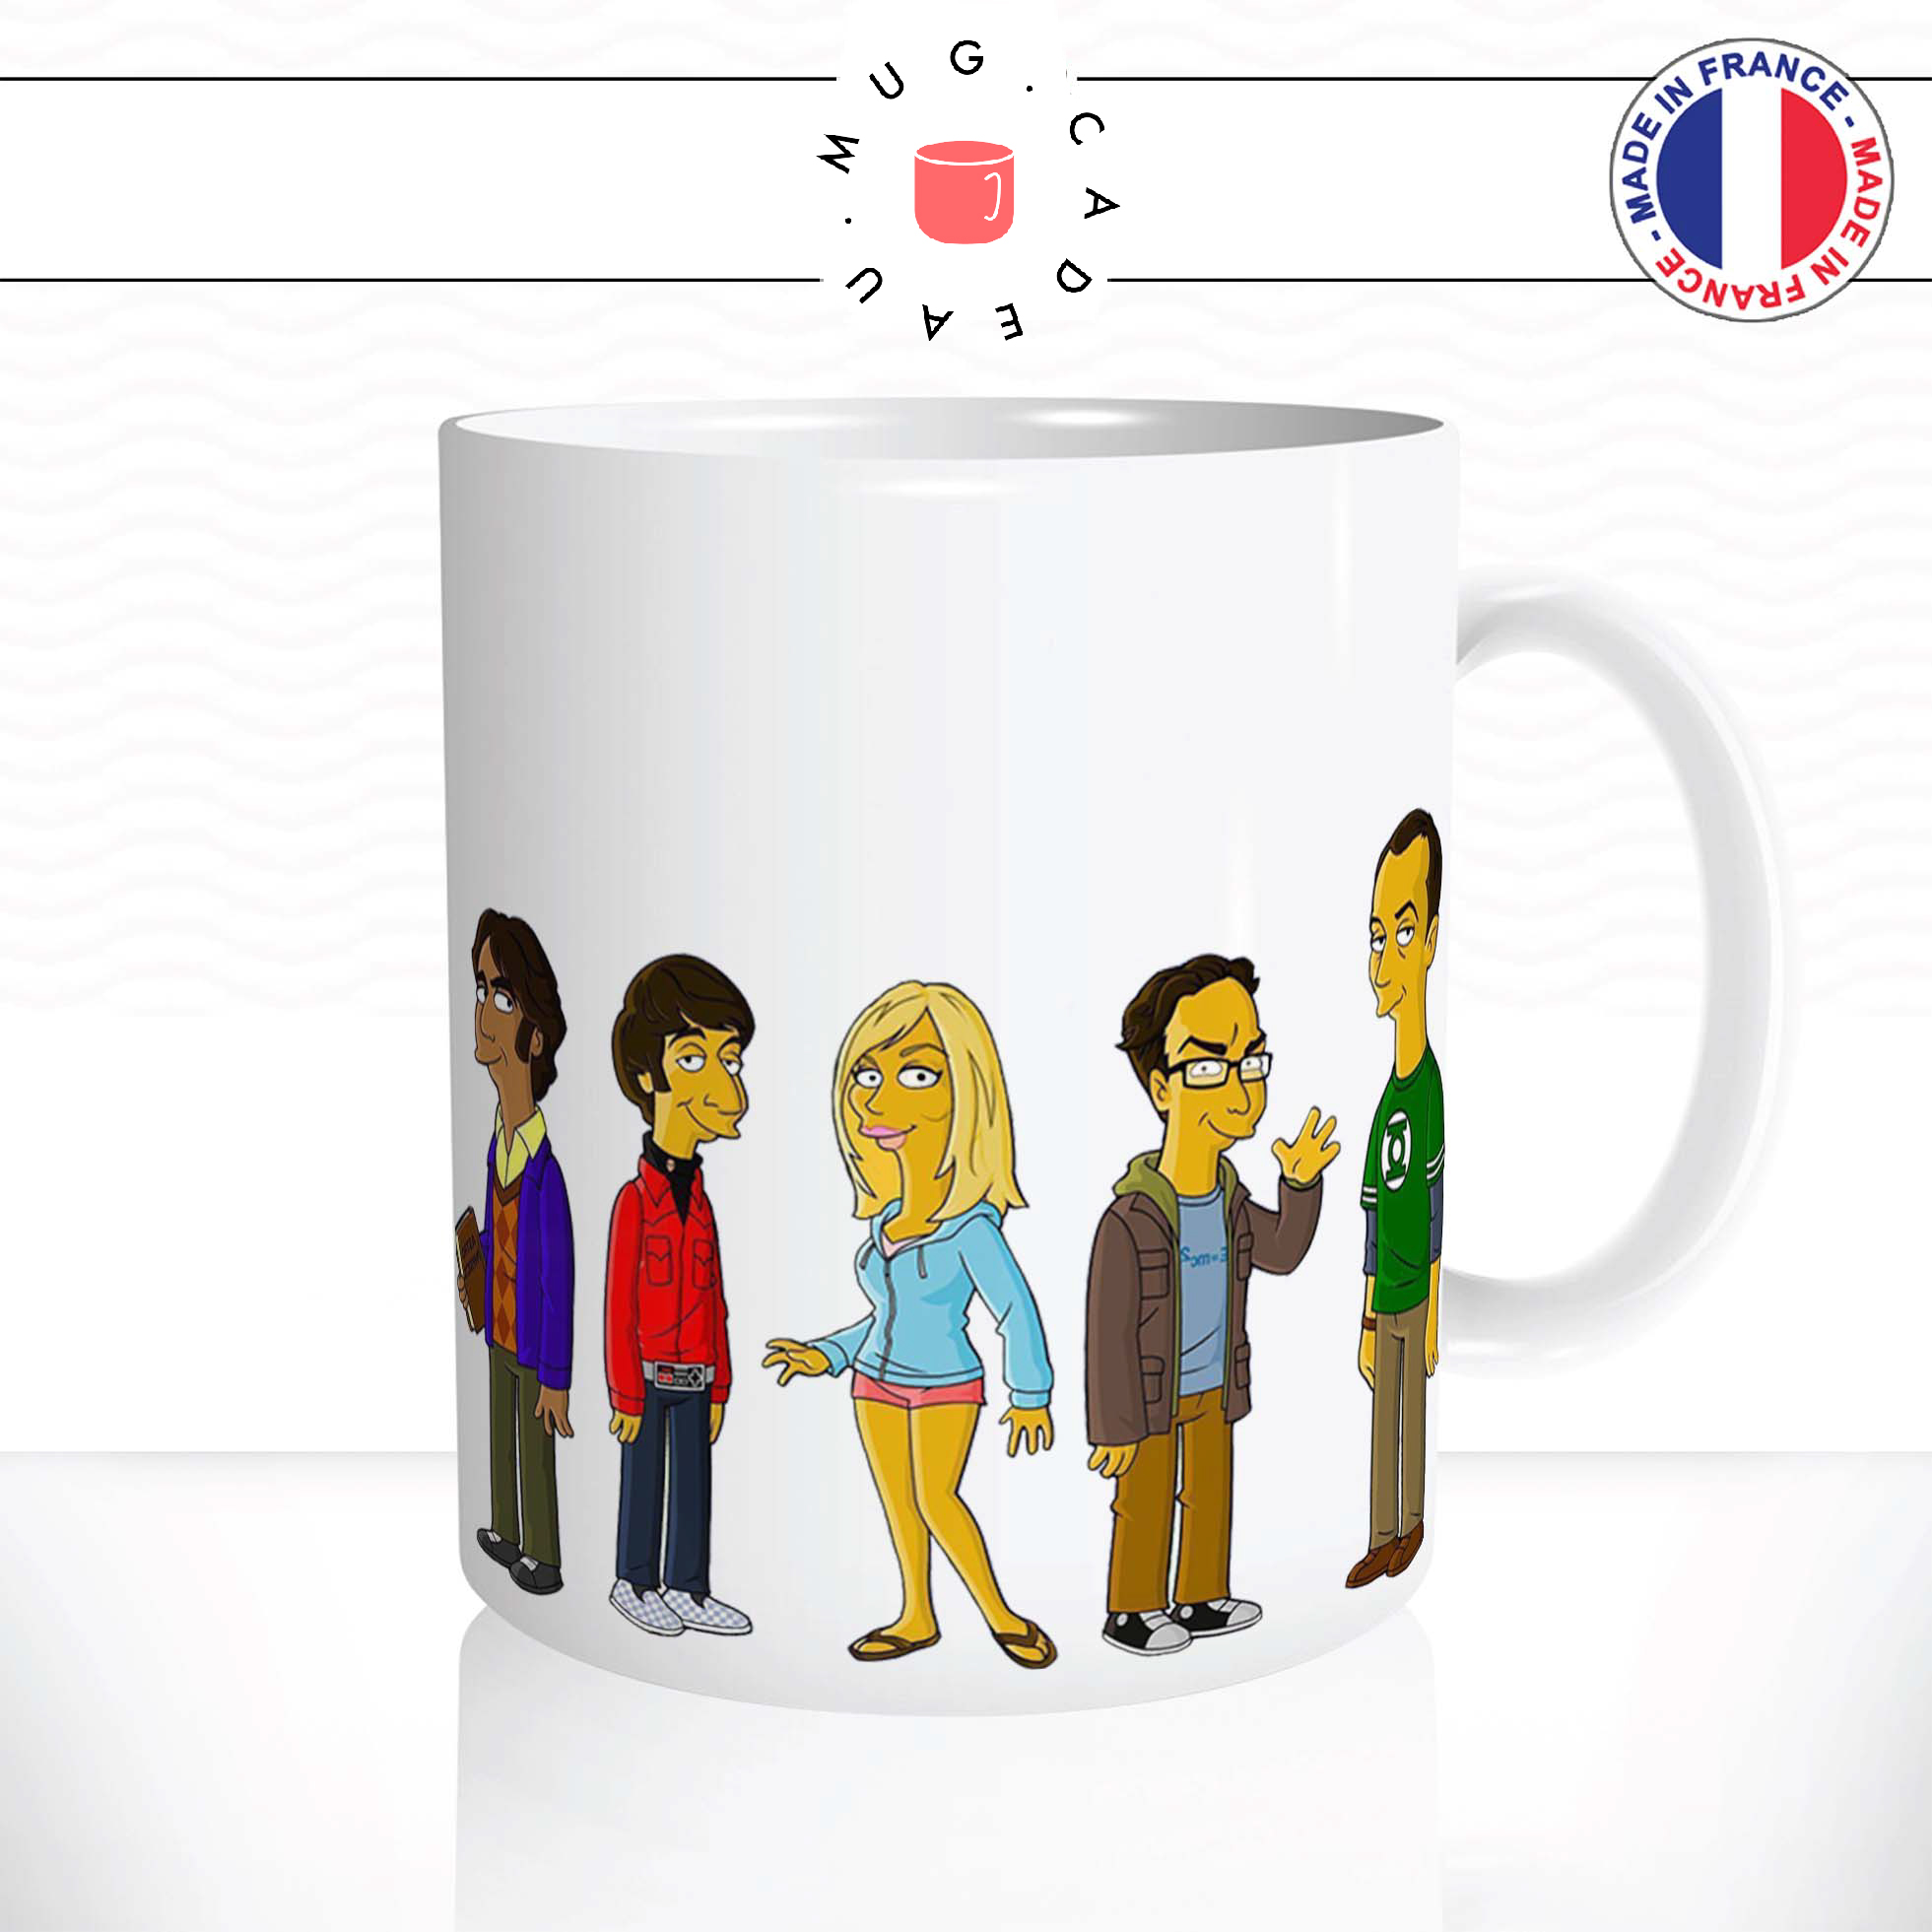 mug-tasse-ref2-serie-big-bang-theorie-simpsons-personnages-cafe-the-mugs-tasses-personnalise-anse-droite